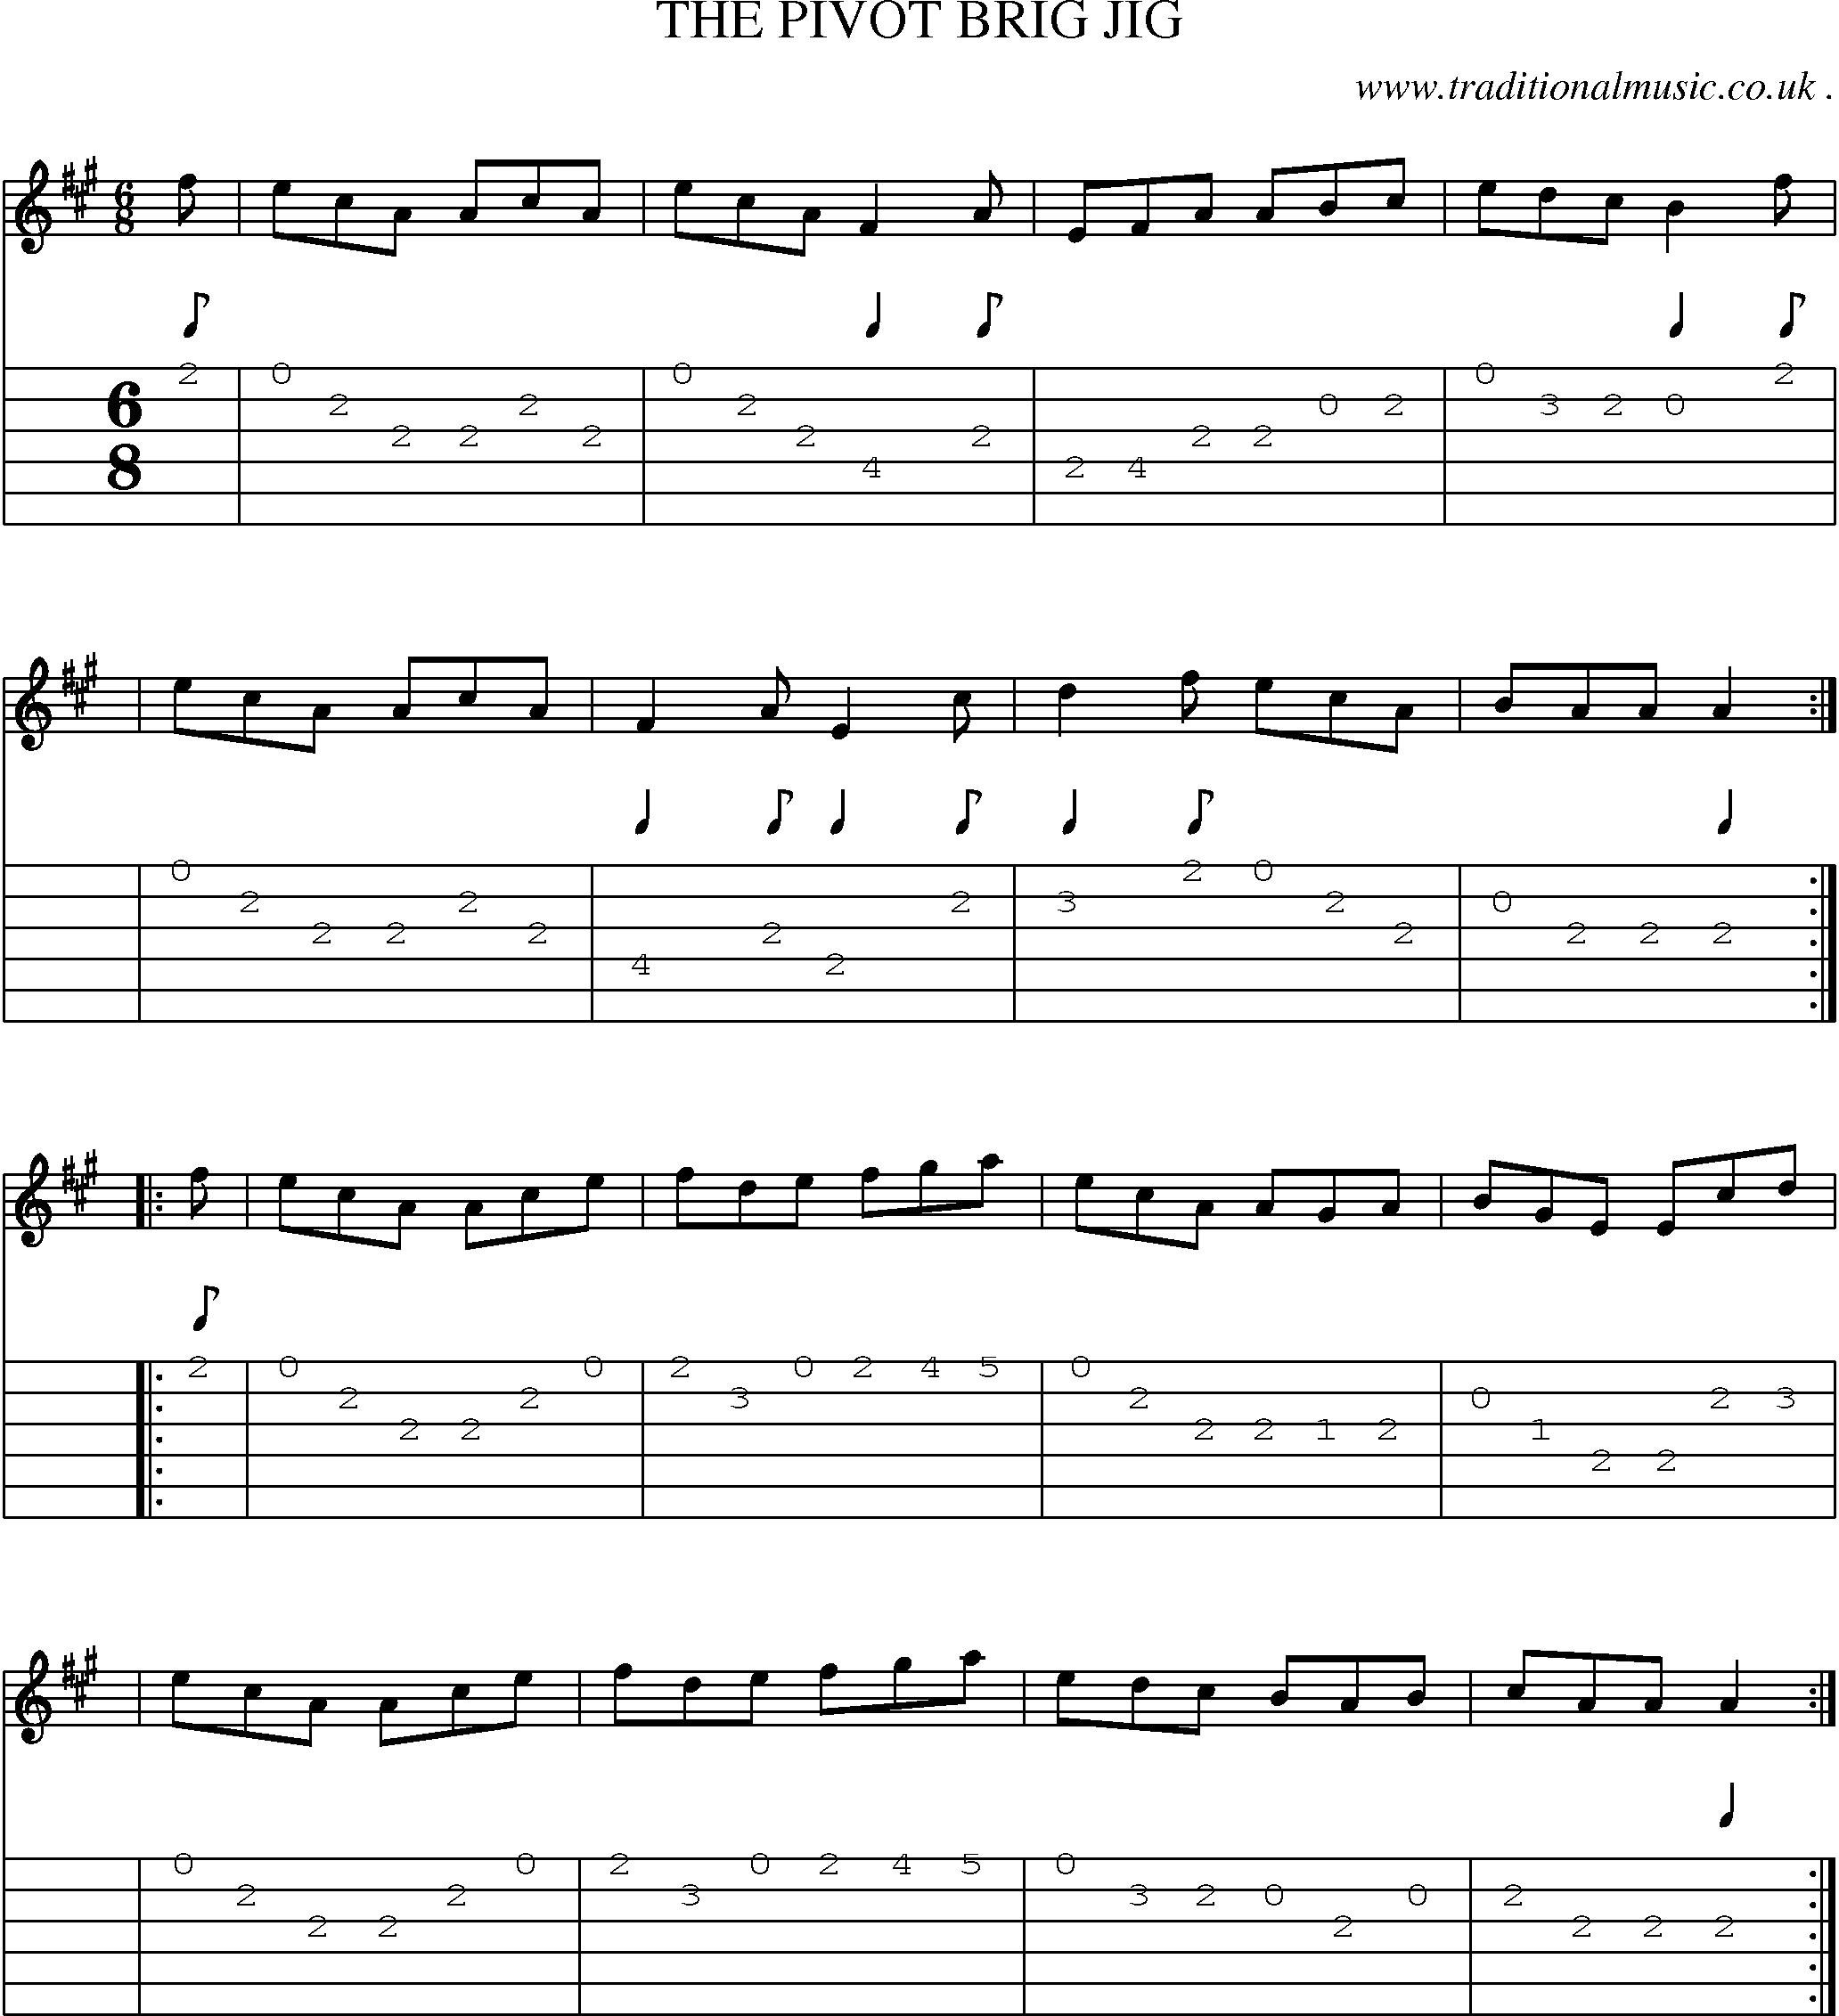 Sheet-Music and Guitar Tabs for The Pivot Brig Jig